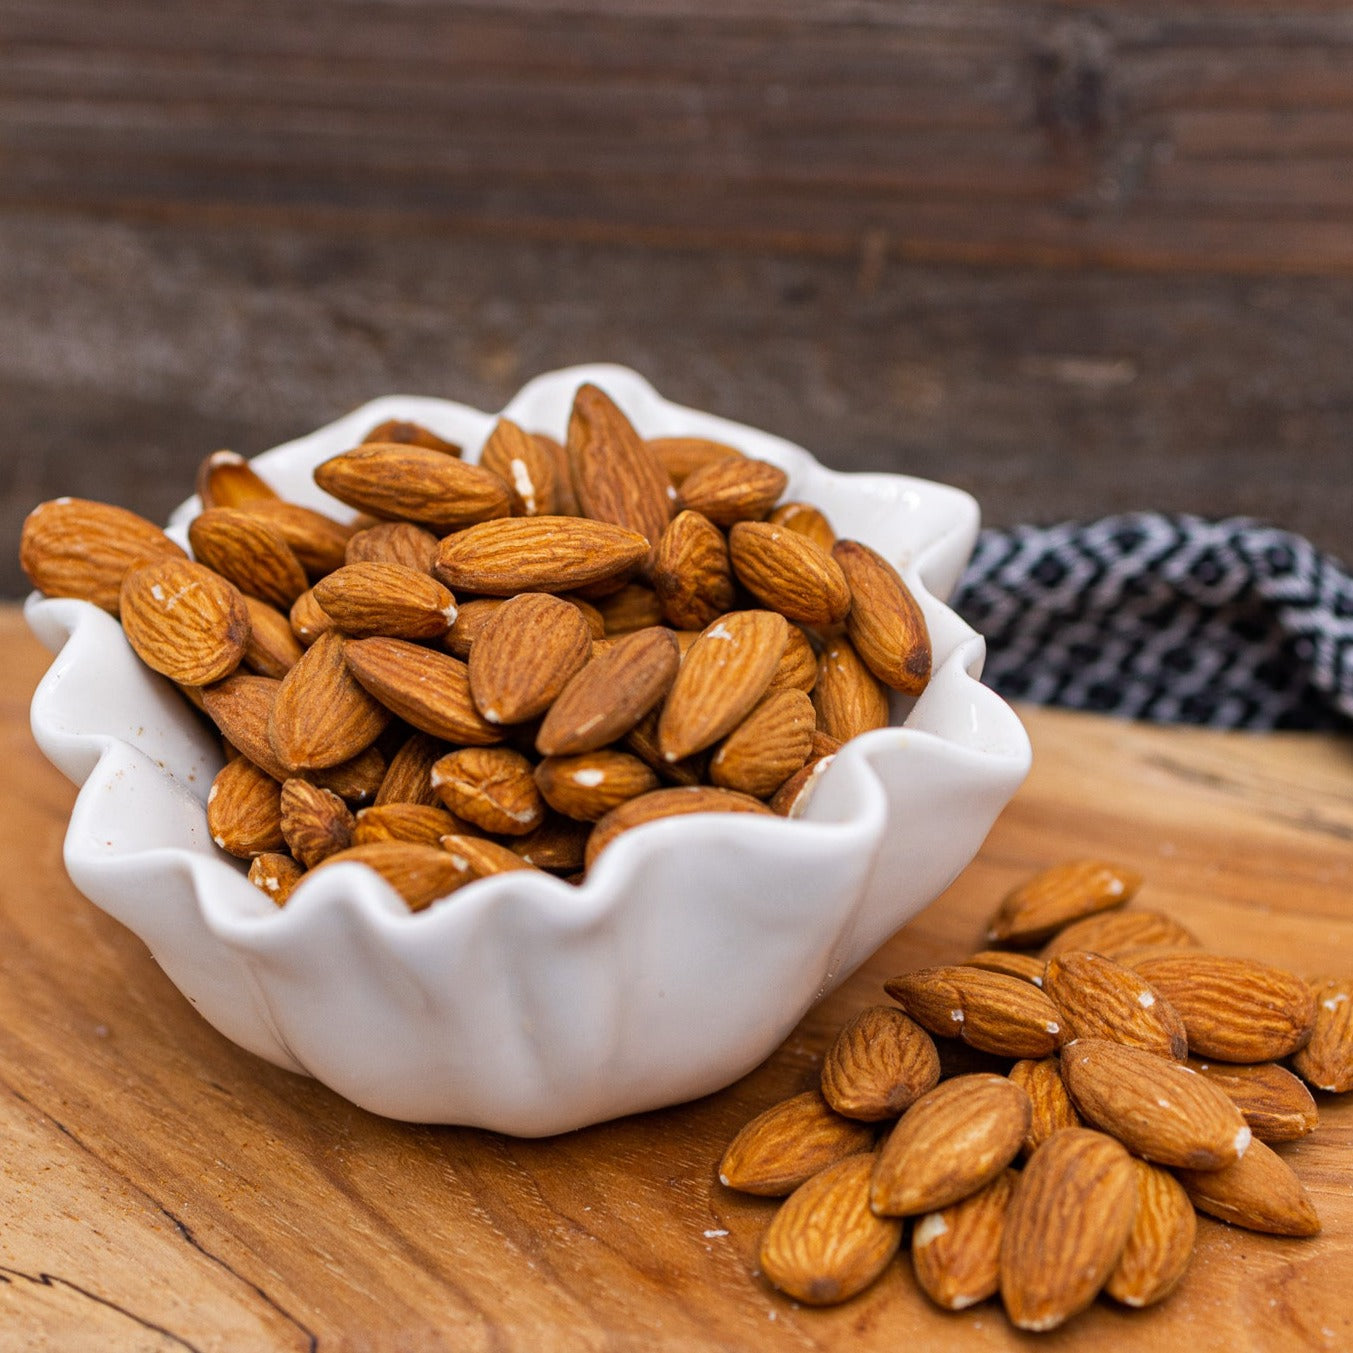 Raw natural almonds